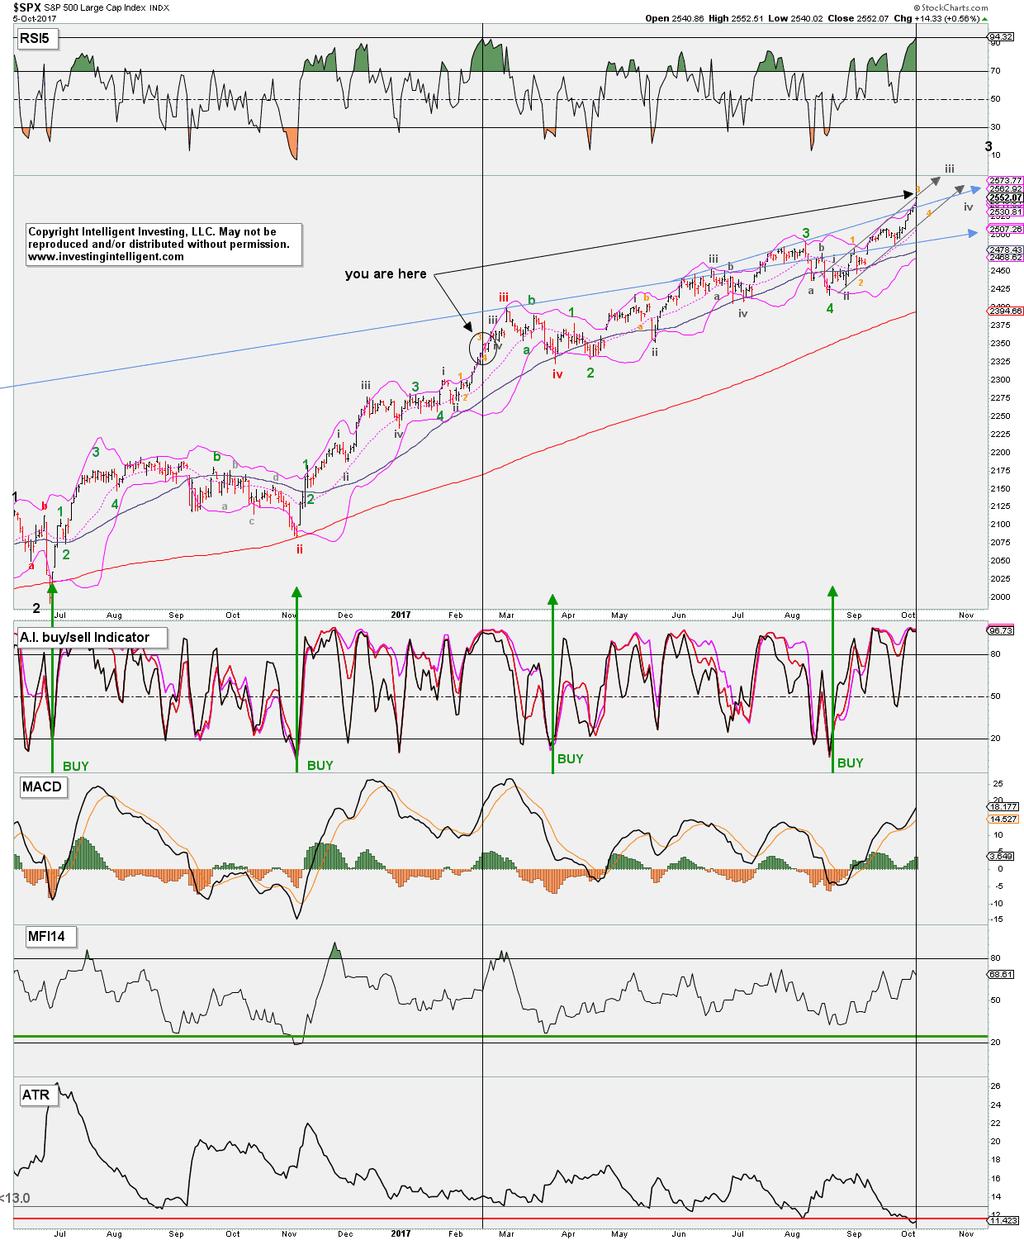 On the S&P daily chart the current setup of the technical indicators (TIs) resembles those of the February rally the most. Hence, one could say you are here ; see Figure-2. Back then the RSI5, A.I. and MACD were at similar levels.